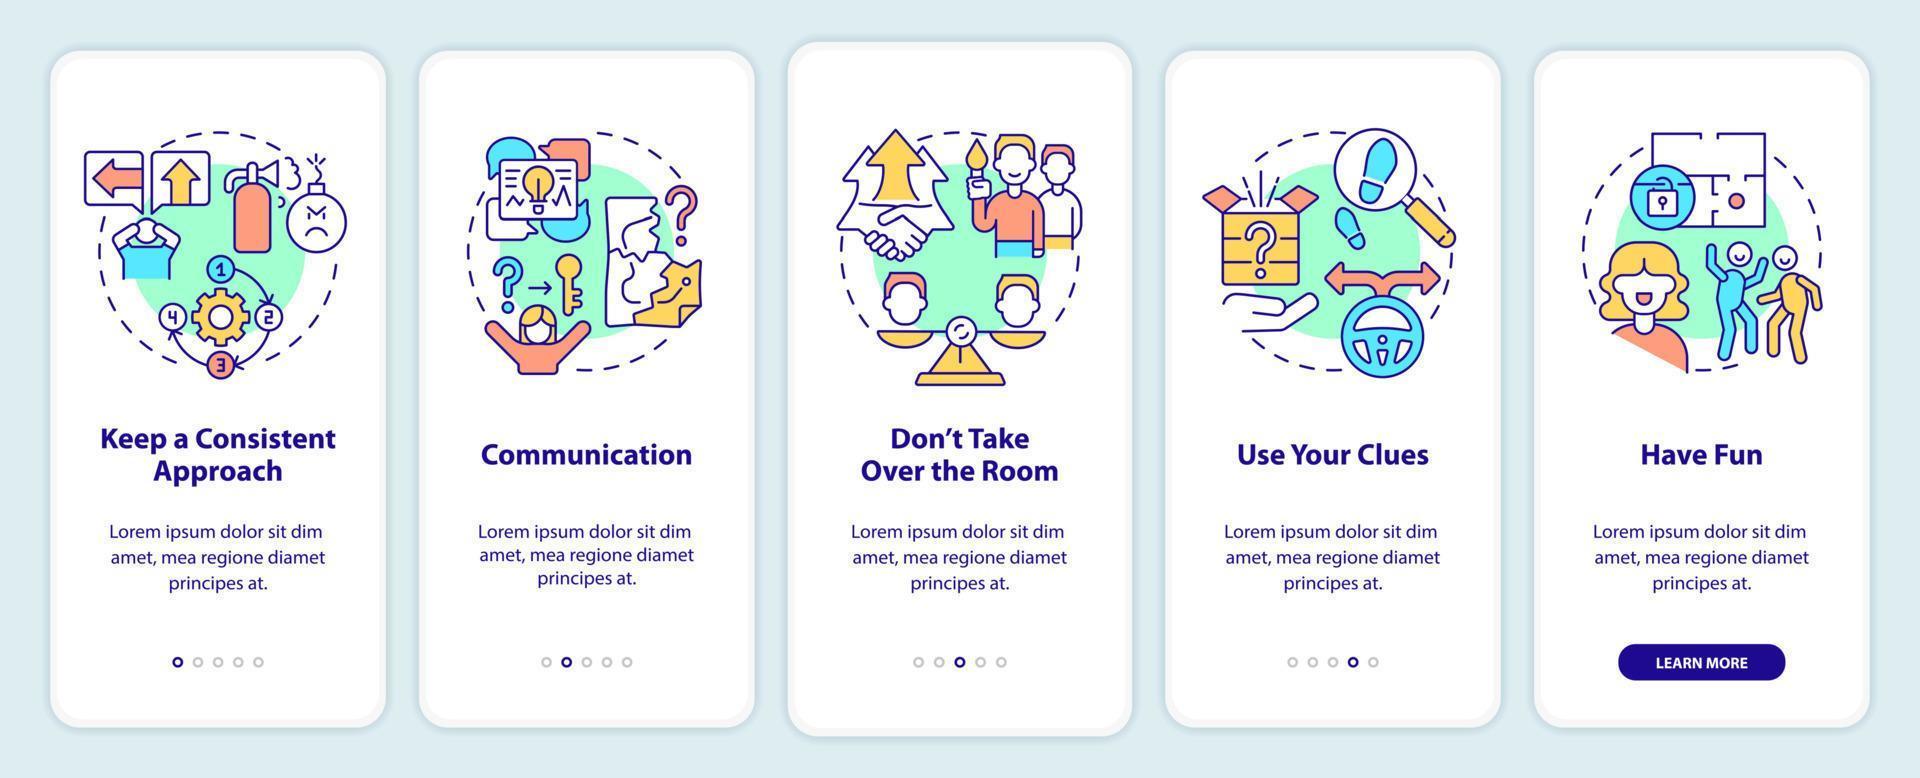 Escape room approaches onboarding mobile app screen. Communication walkthrough 5 steps graphic instructions pages with linear concepts. UI, UX, GUI template. vector